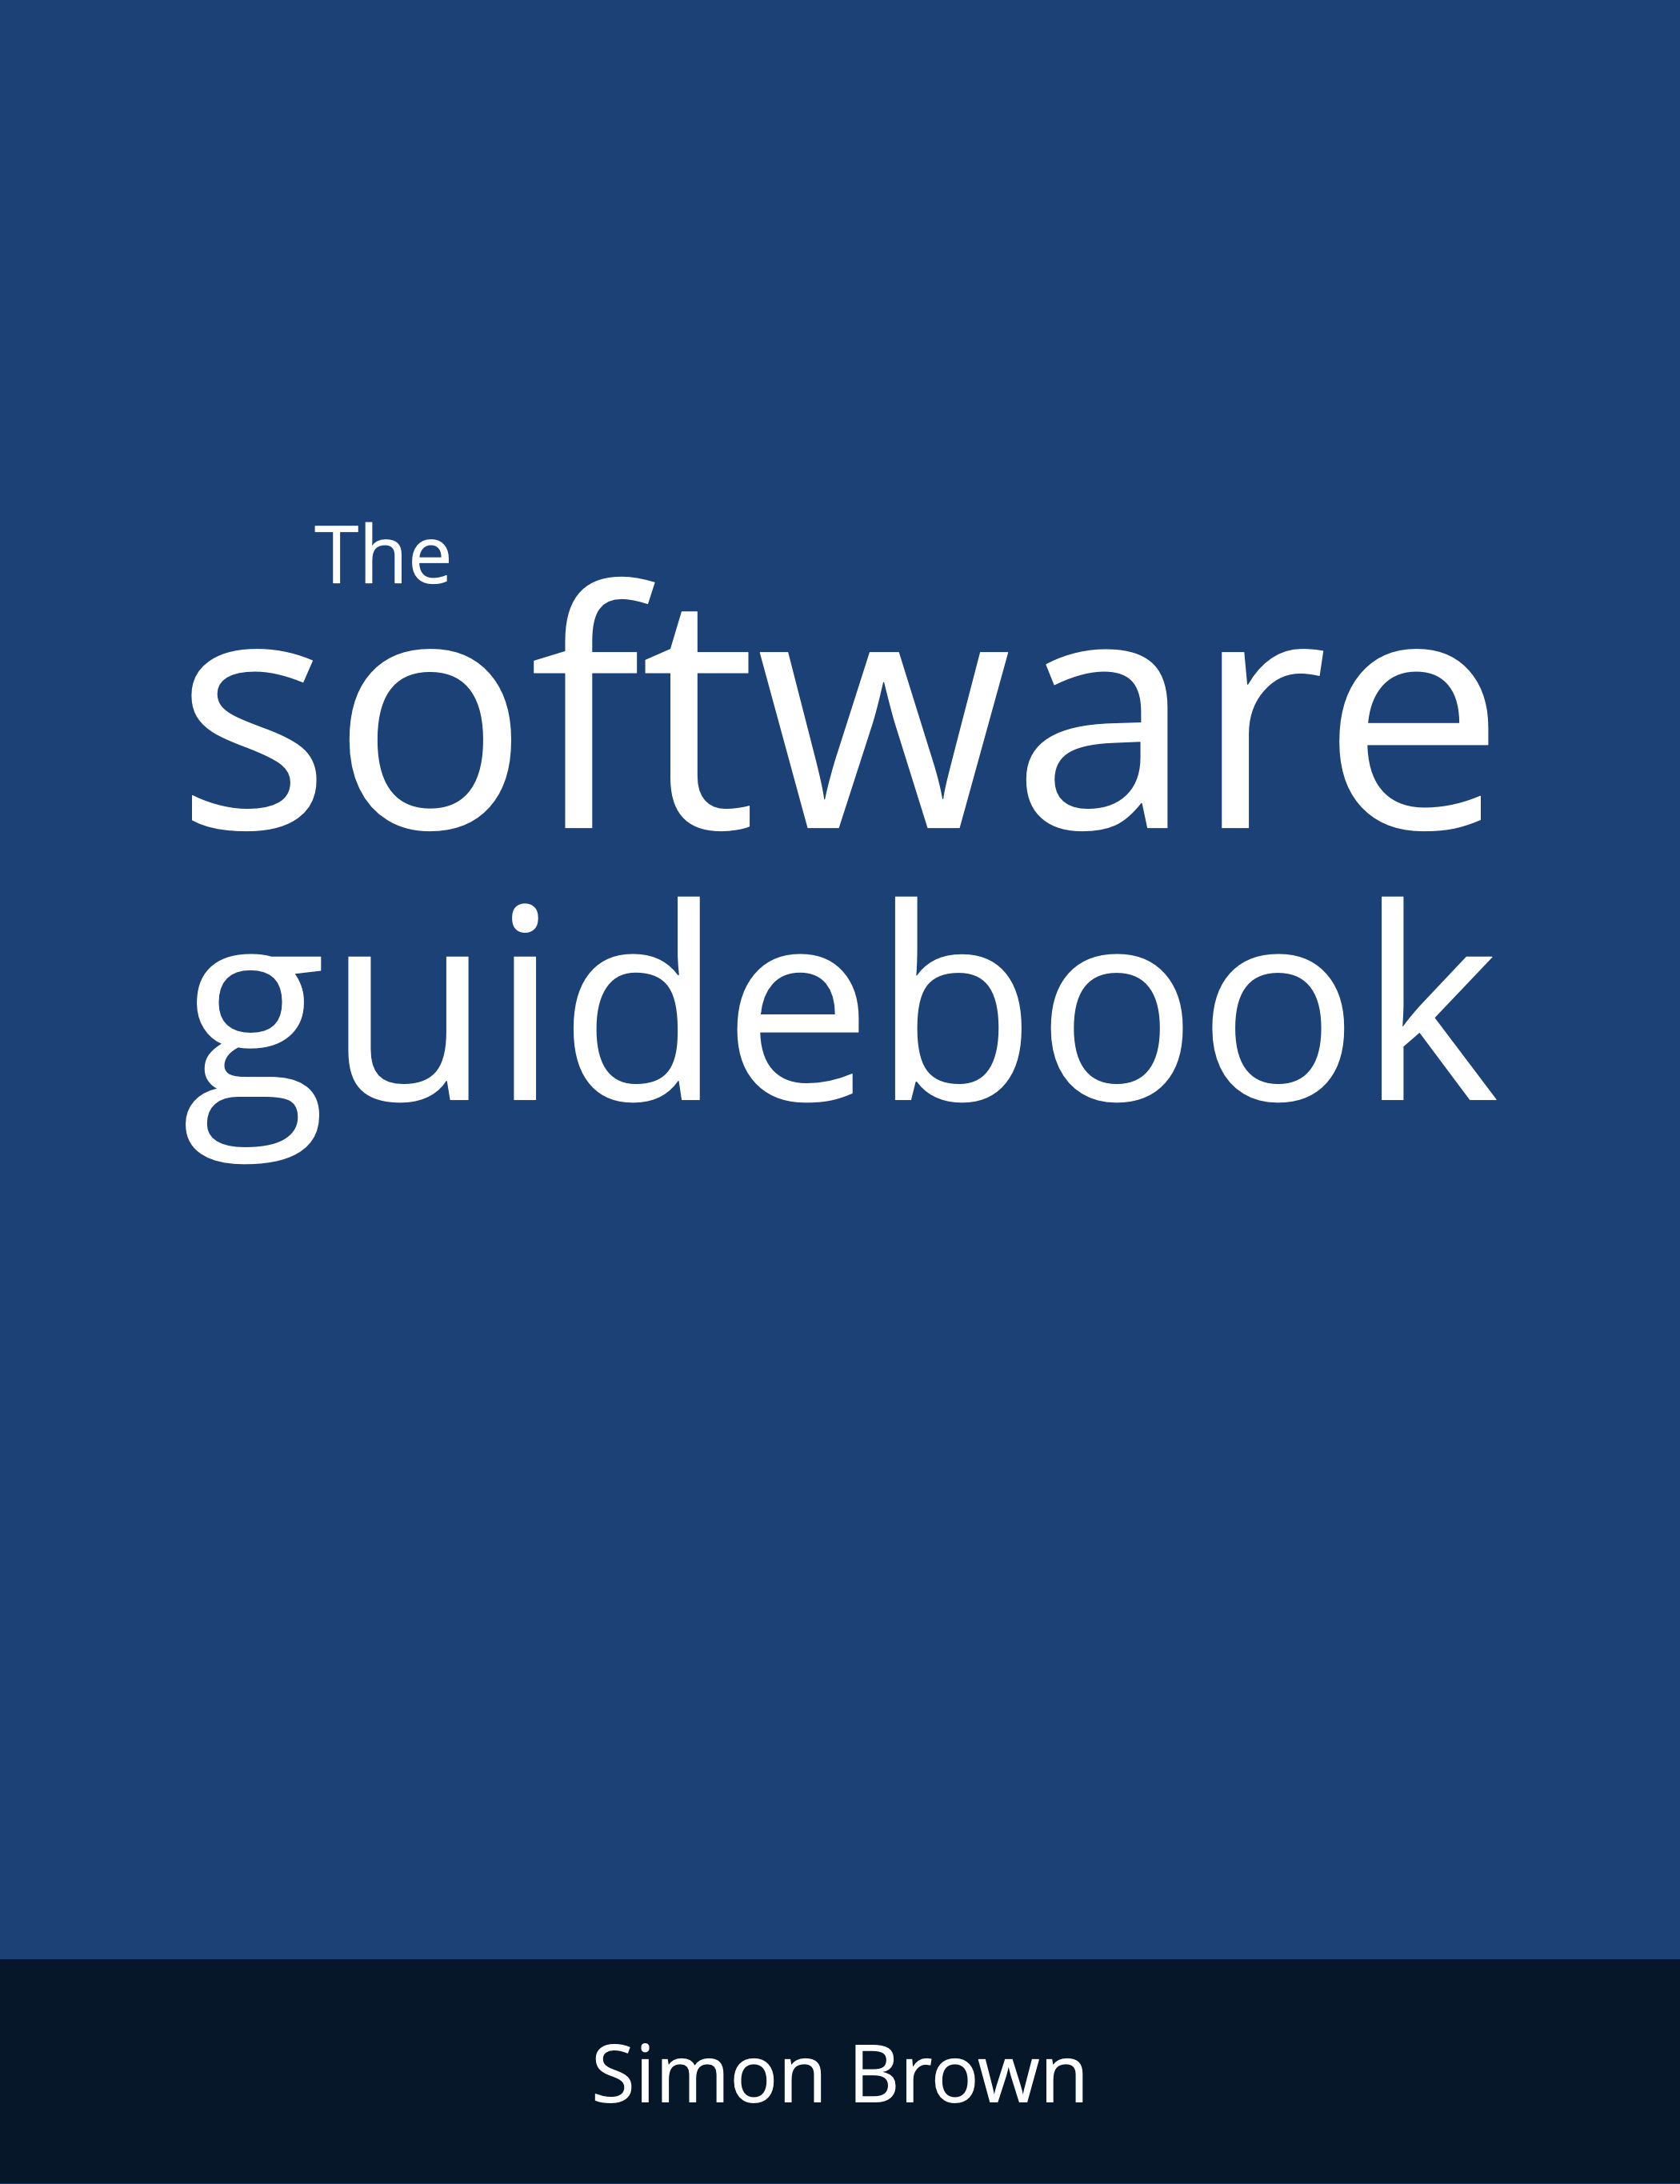 The software guidebook